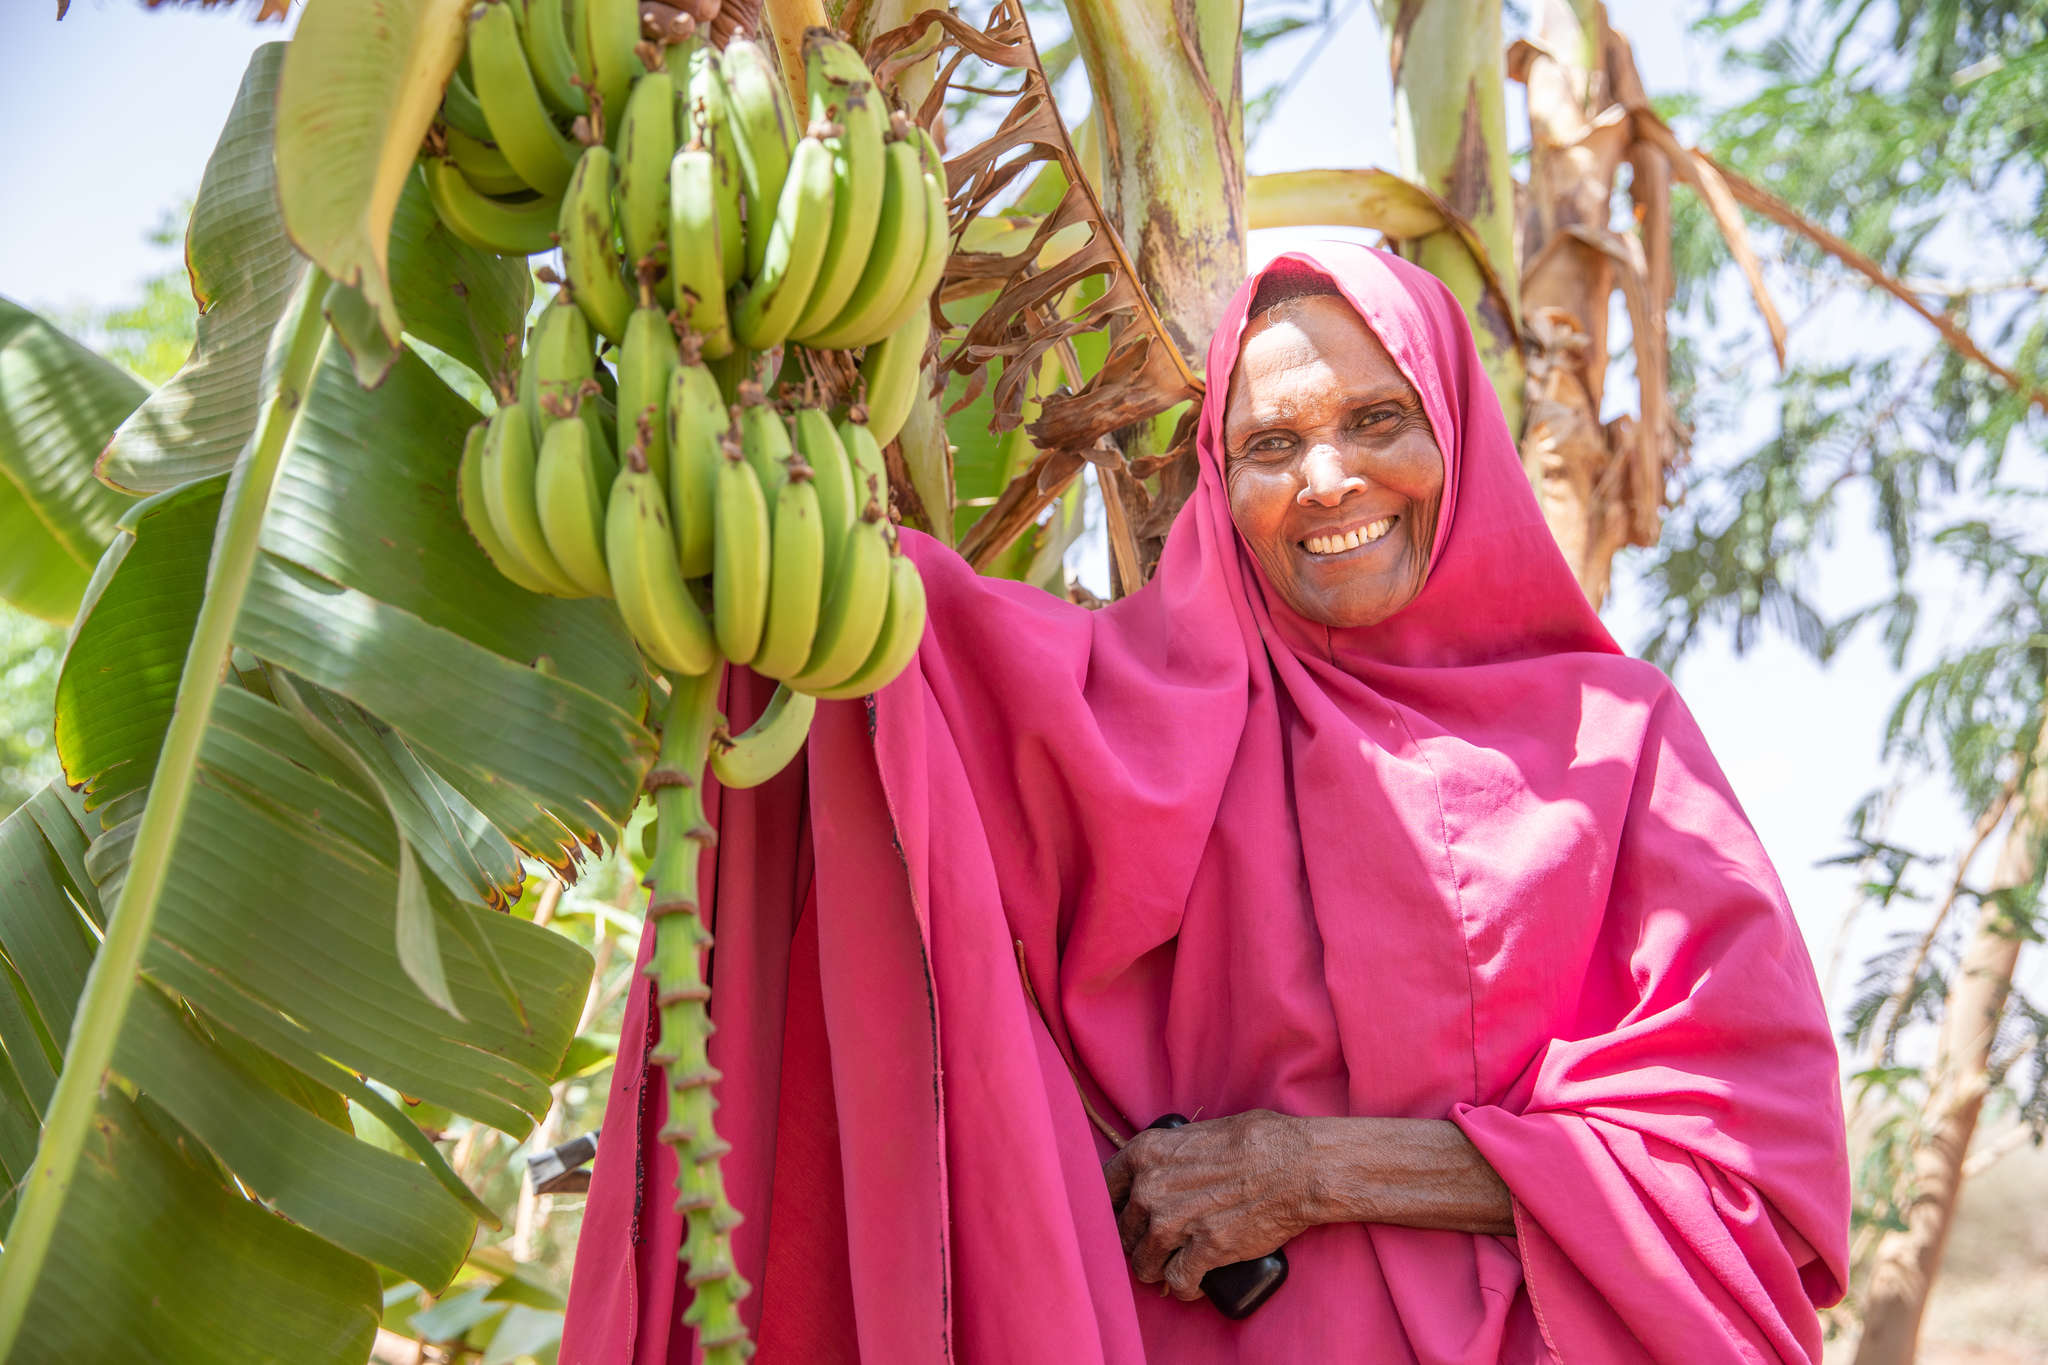 A person standing next to a fruiting banana tree.